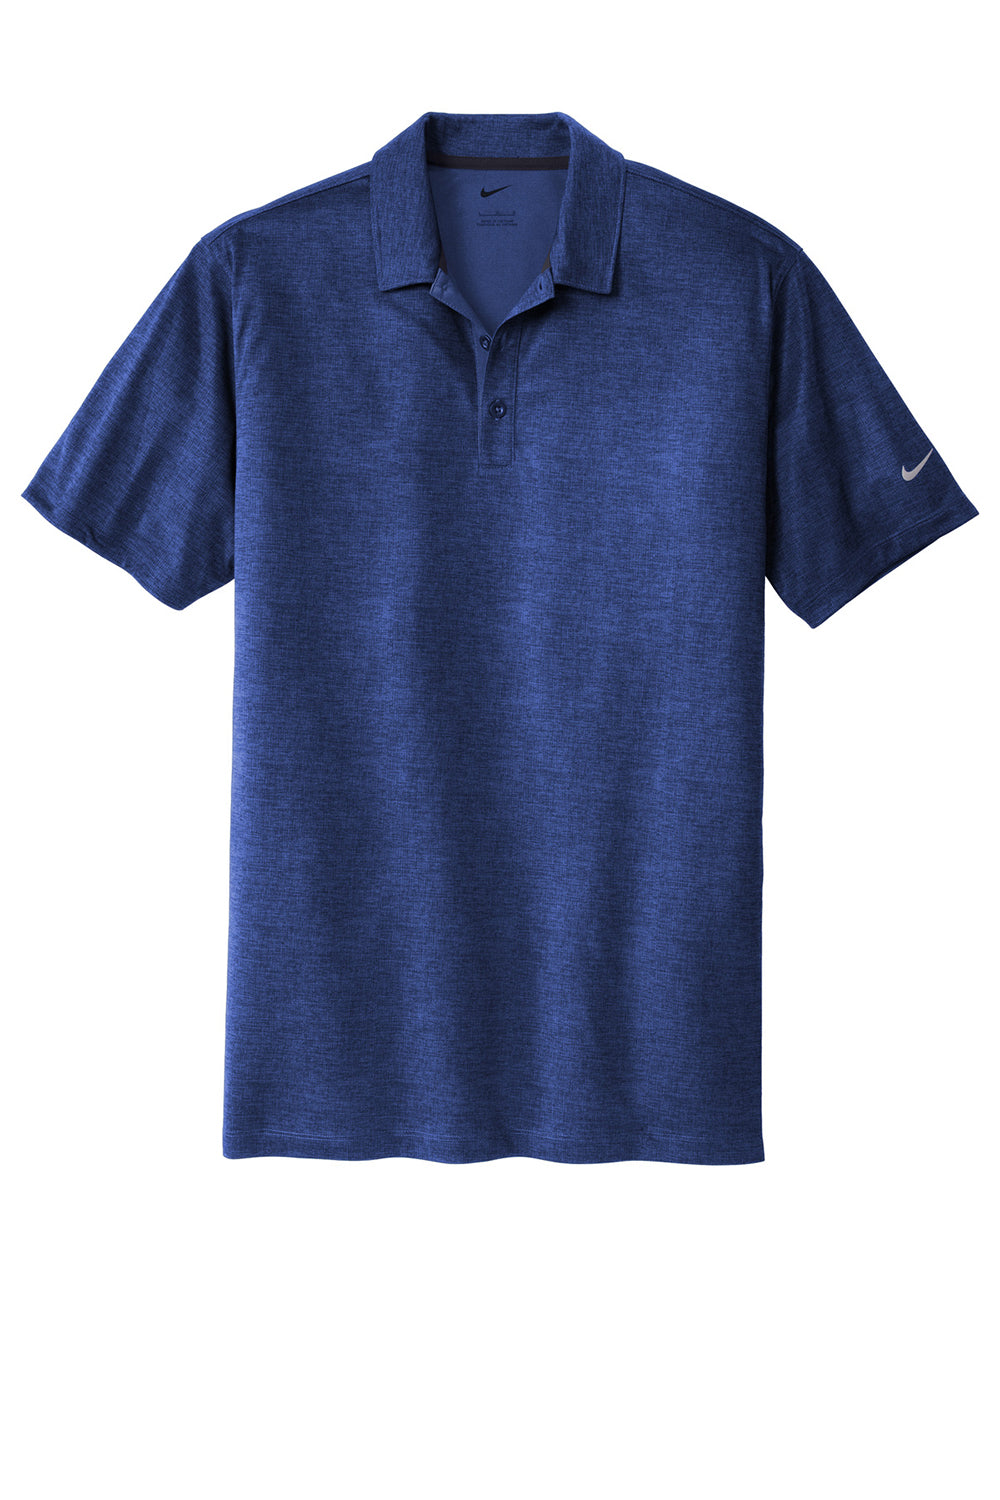 Nike 838965 Mens Dri-Fit Moisture Wicking Short Sleeve Polo Shirt Old Royal Blue Flat Front